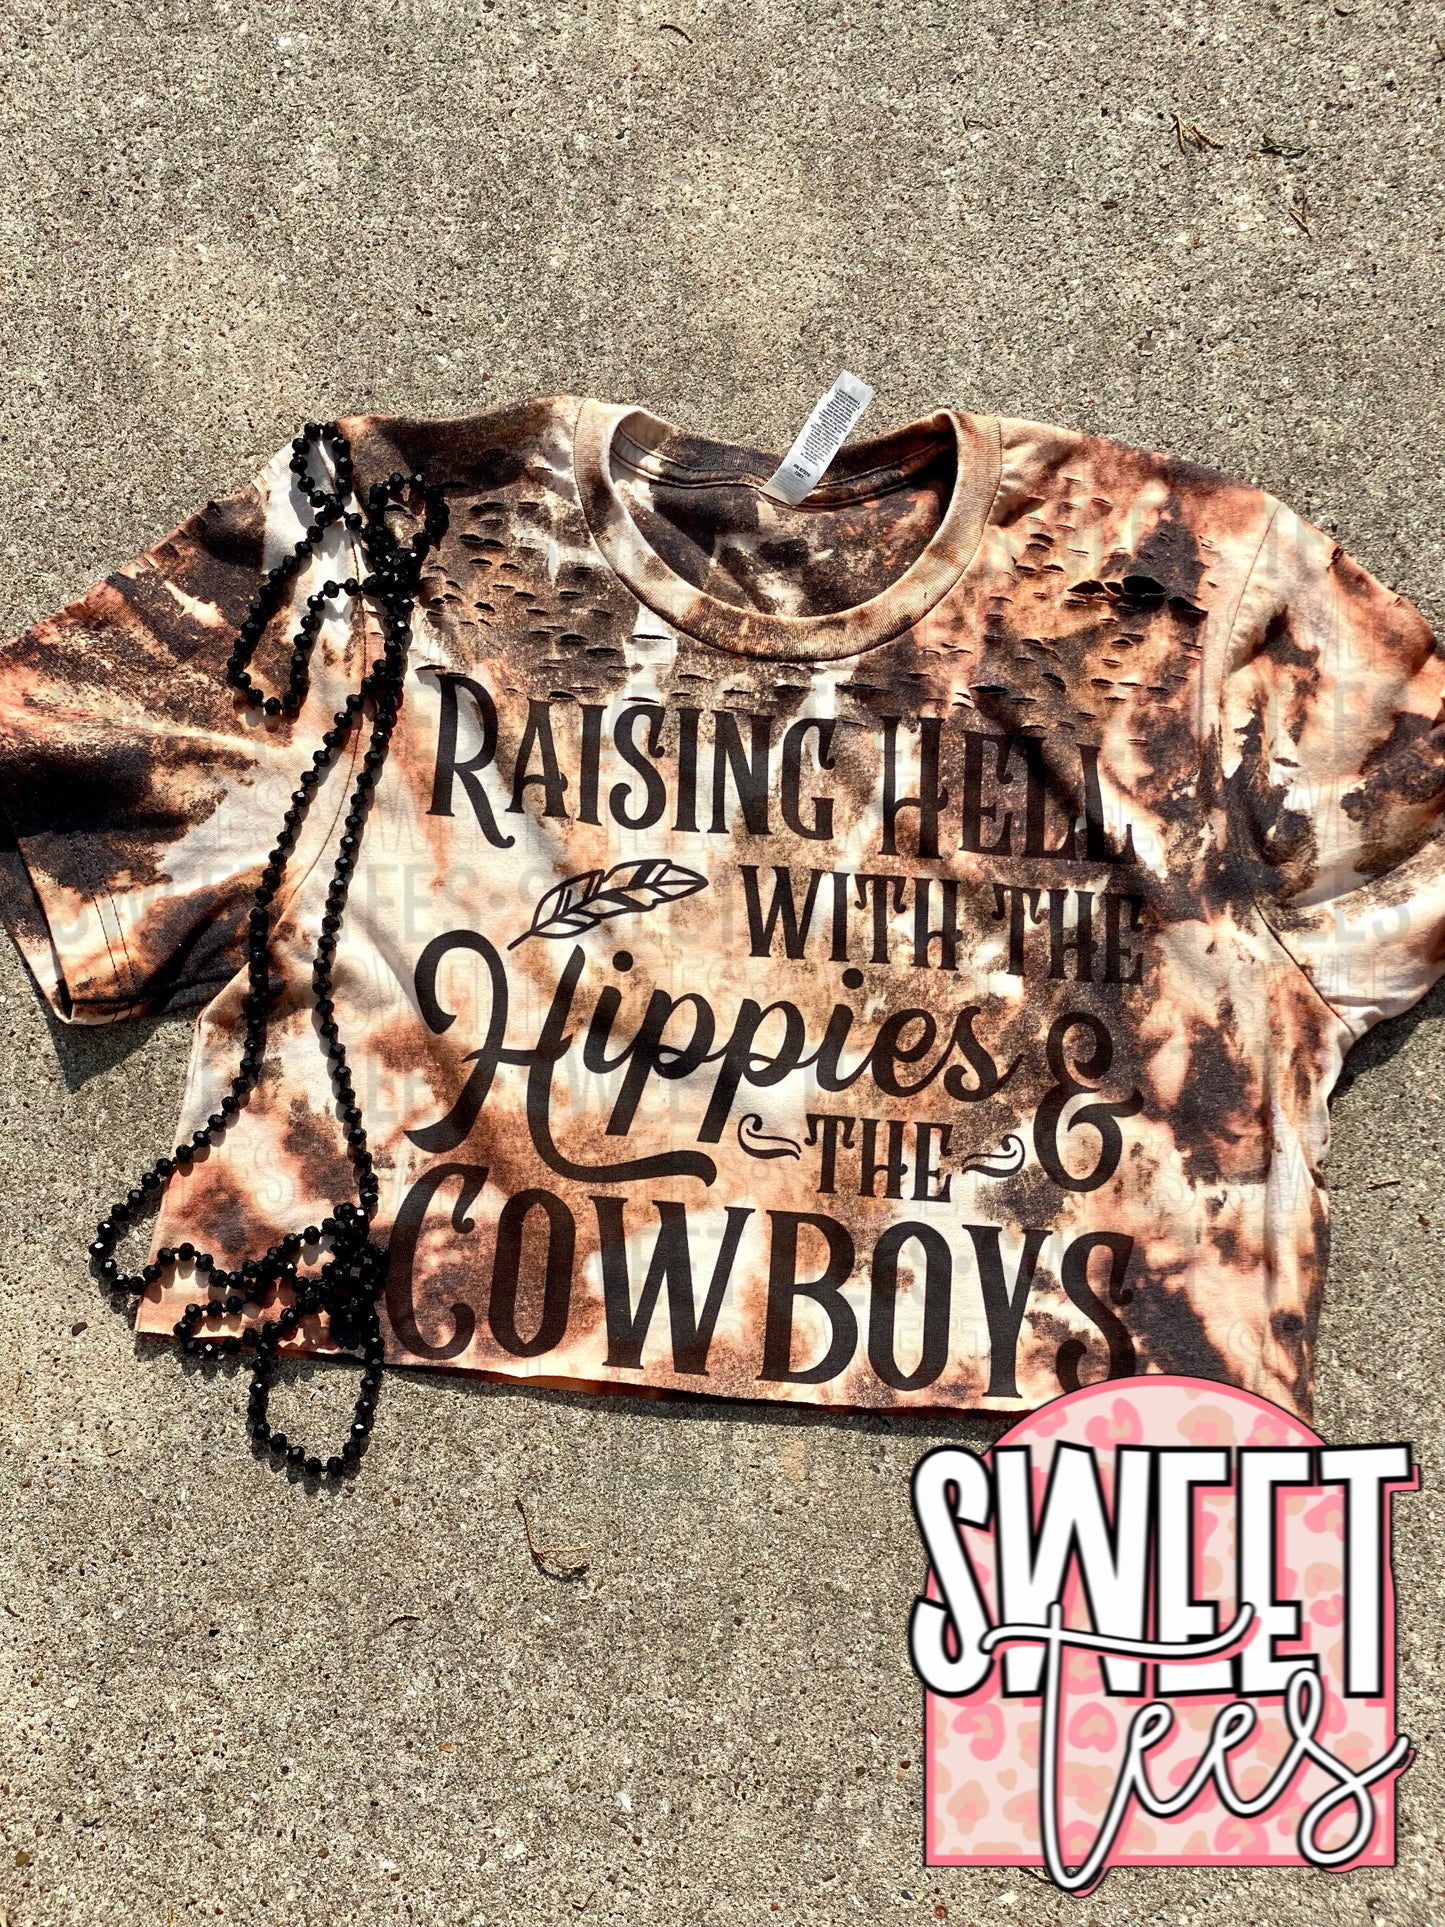 Raising Hell with the Hippies and Cowboys Crop Top